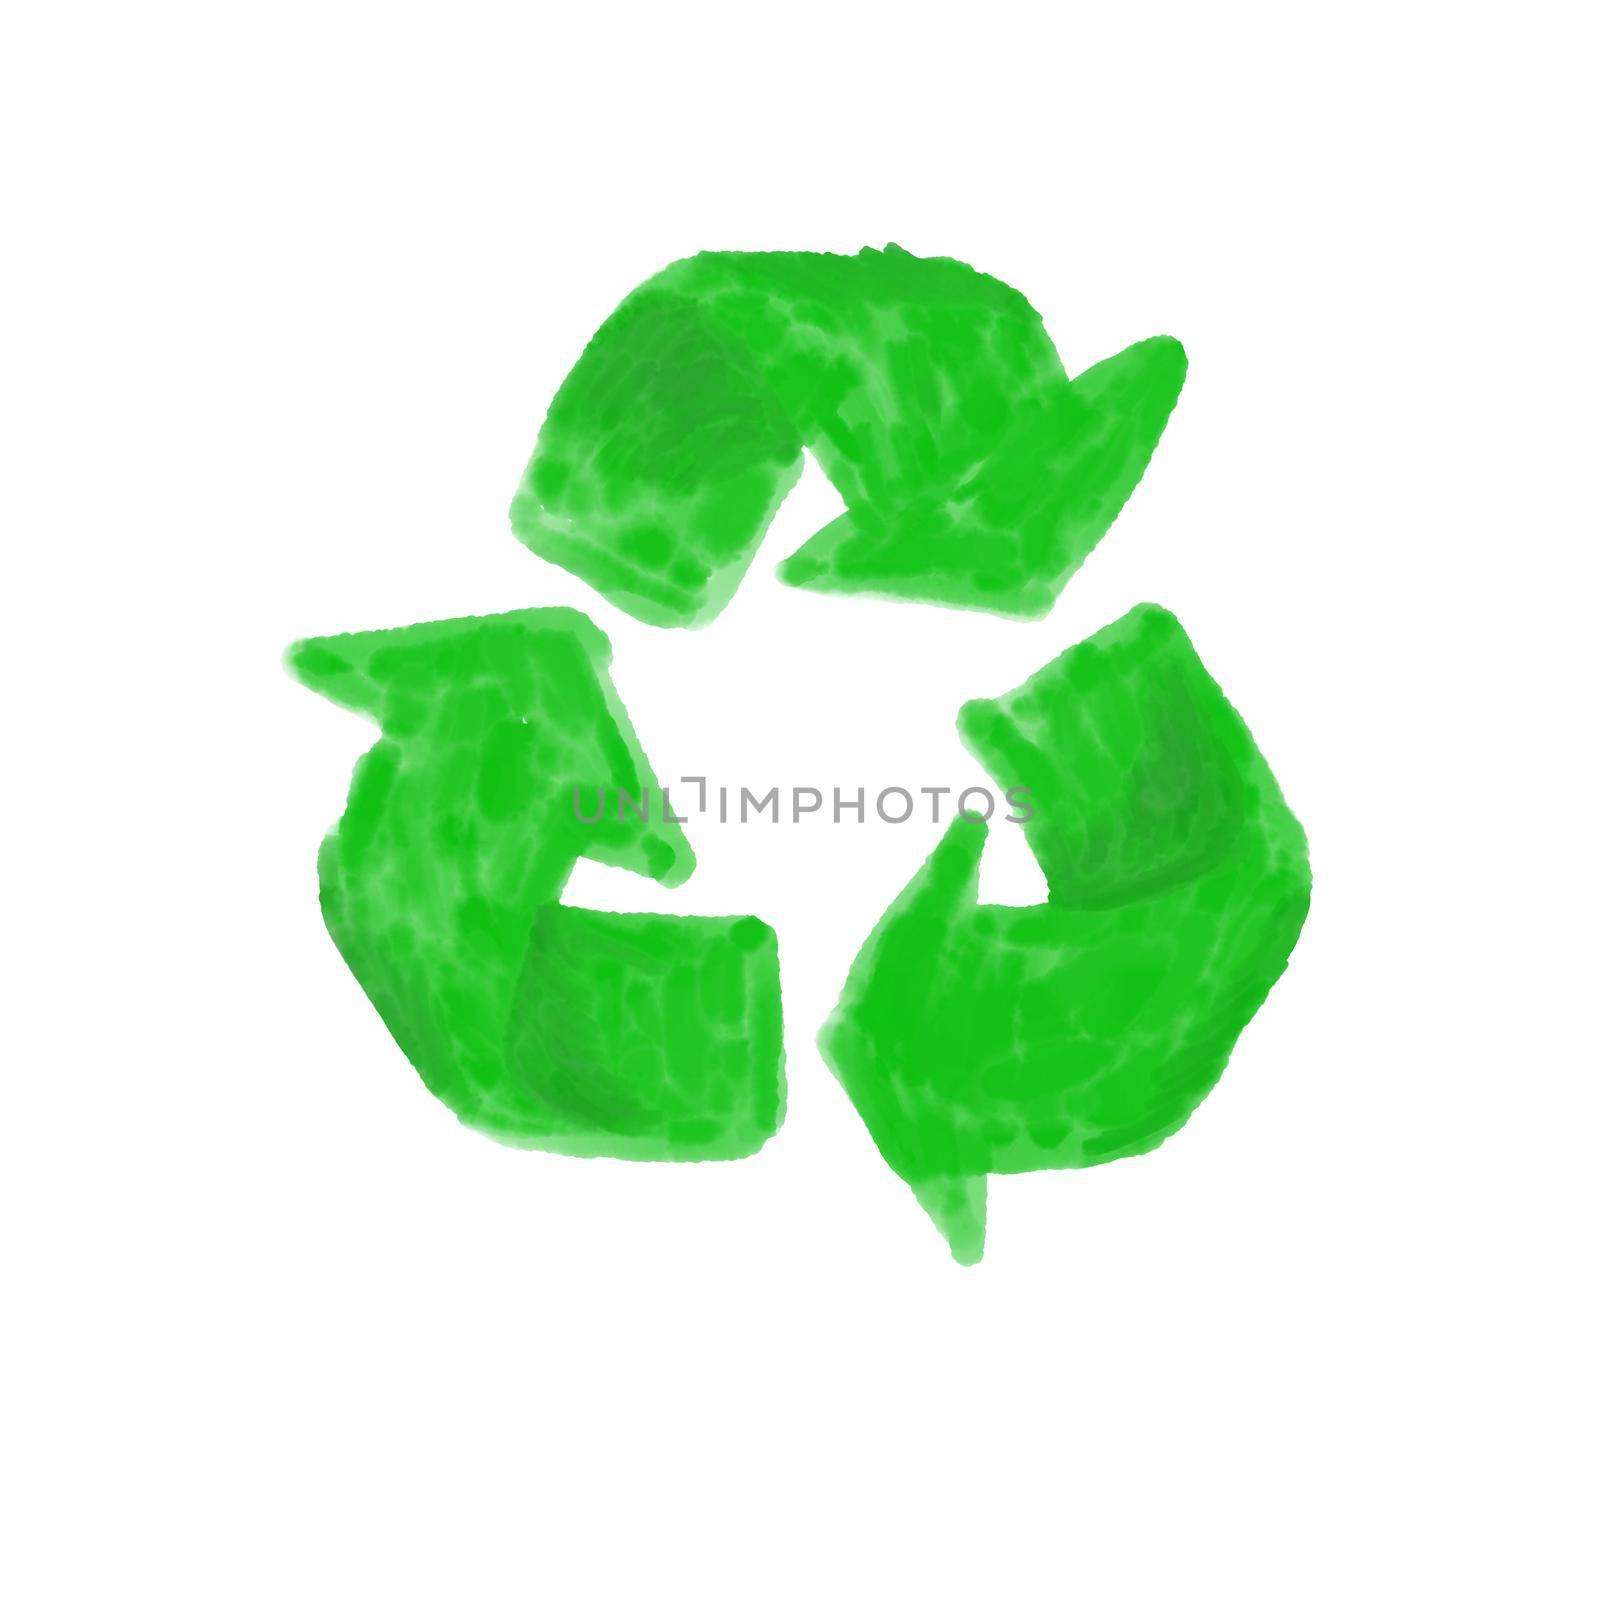 recycle symbol green watercolor isolated on white background by tidarattj